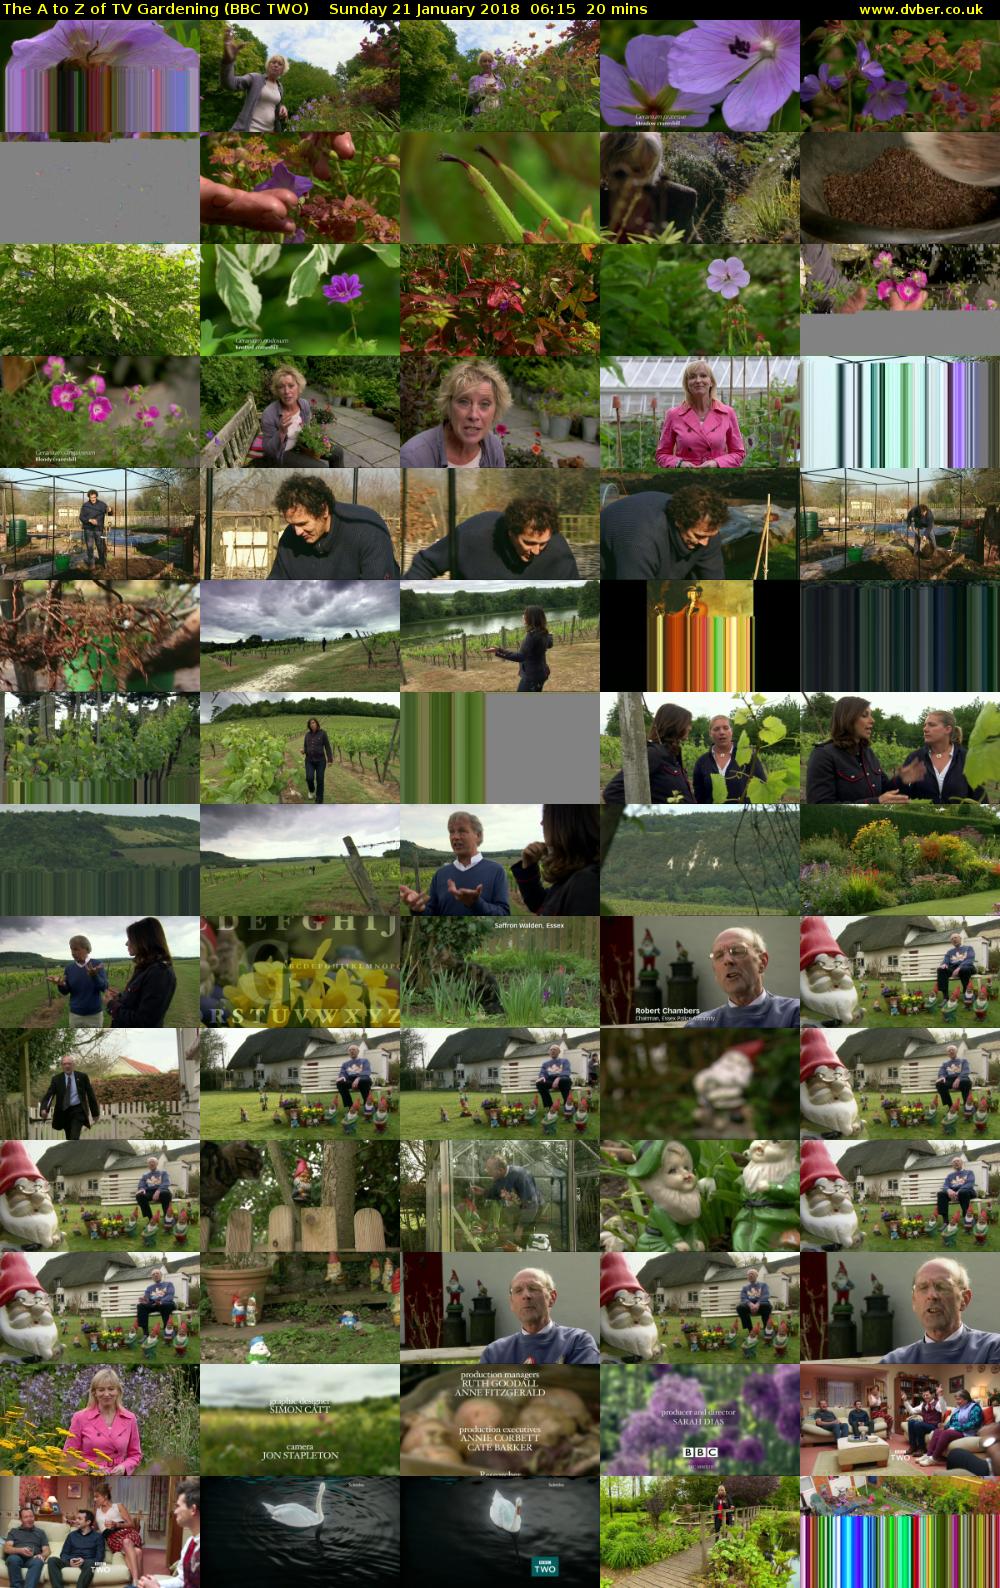 The A to Z of TV Gardening (BBC TWO) Sunday 21 January 2018 06:15 - 06:35